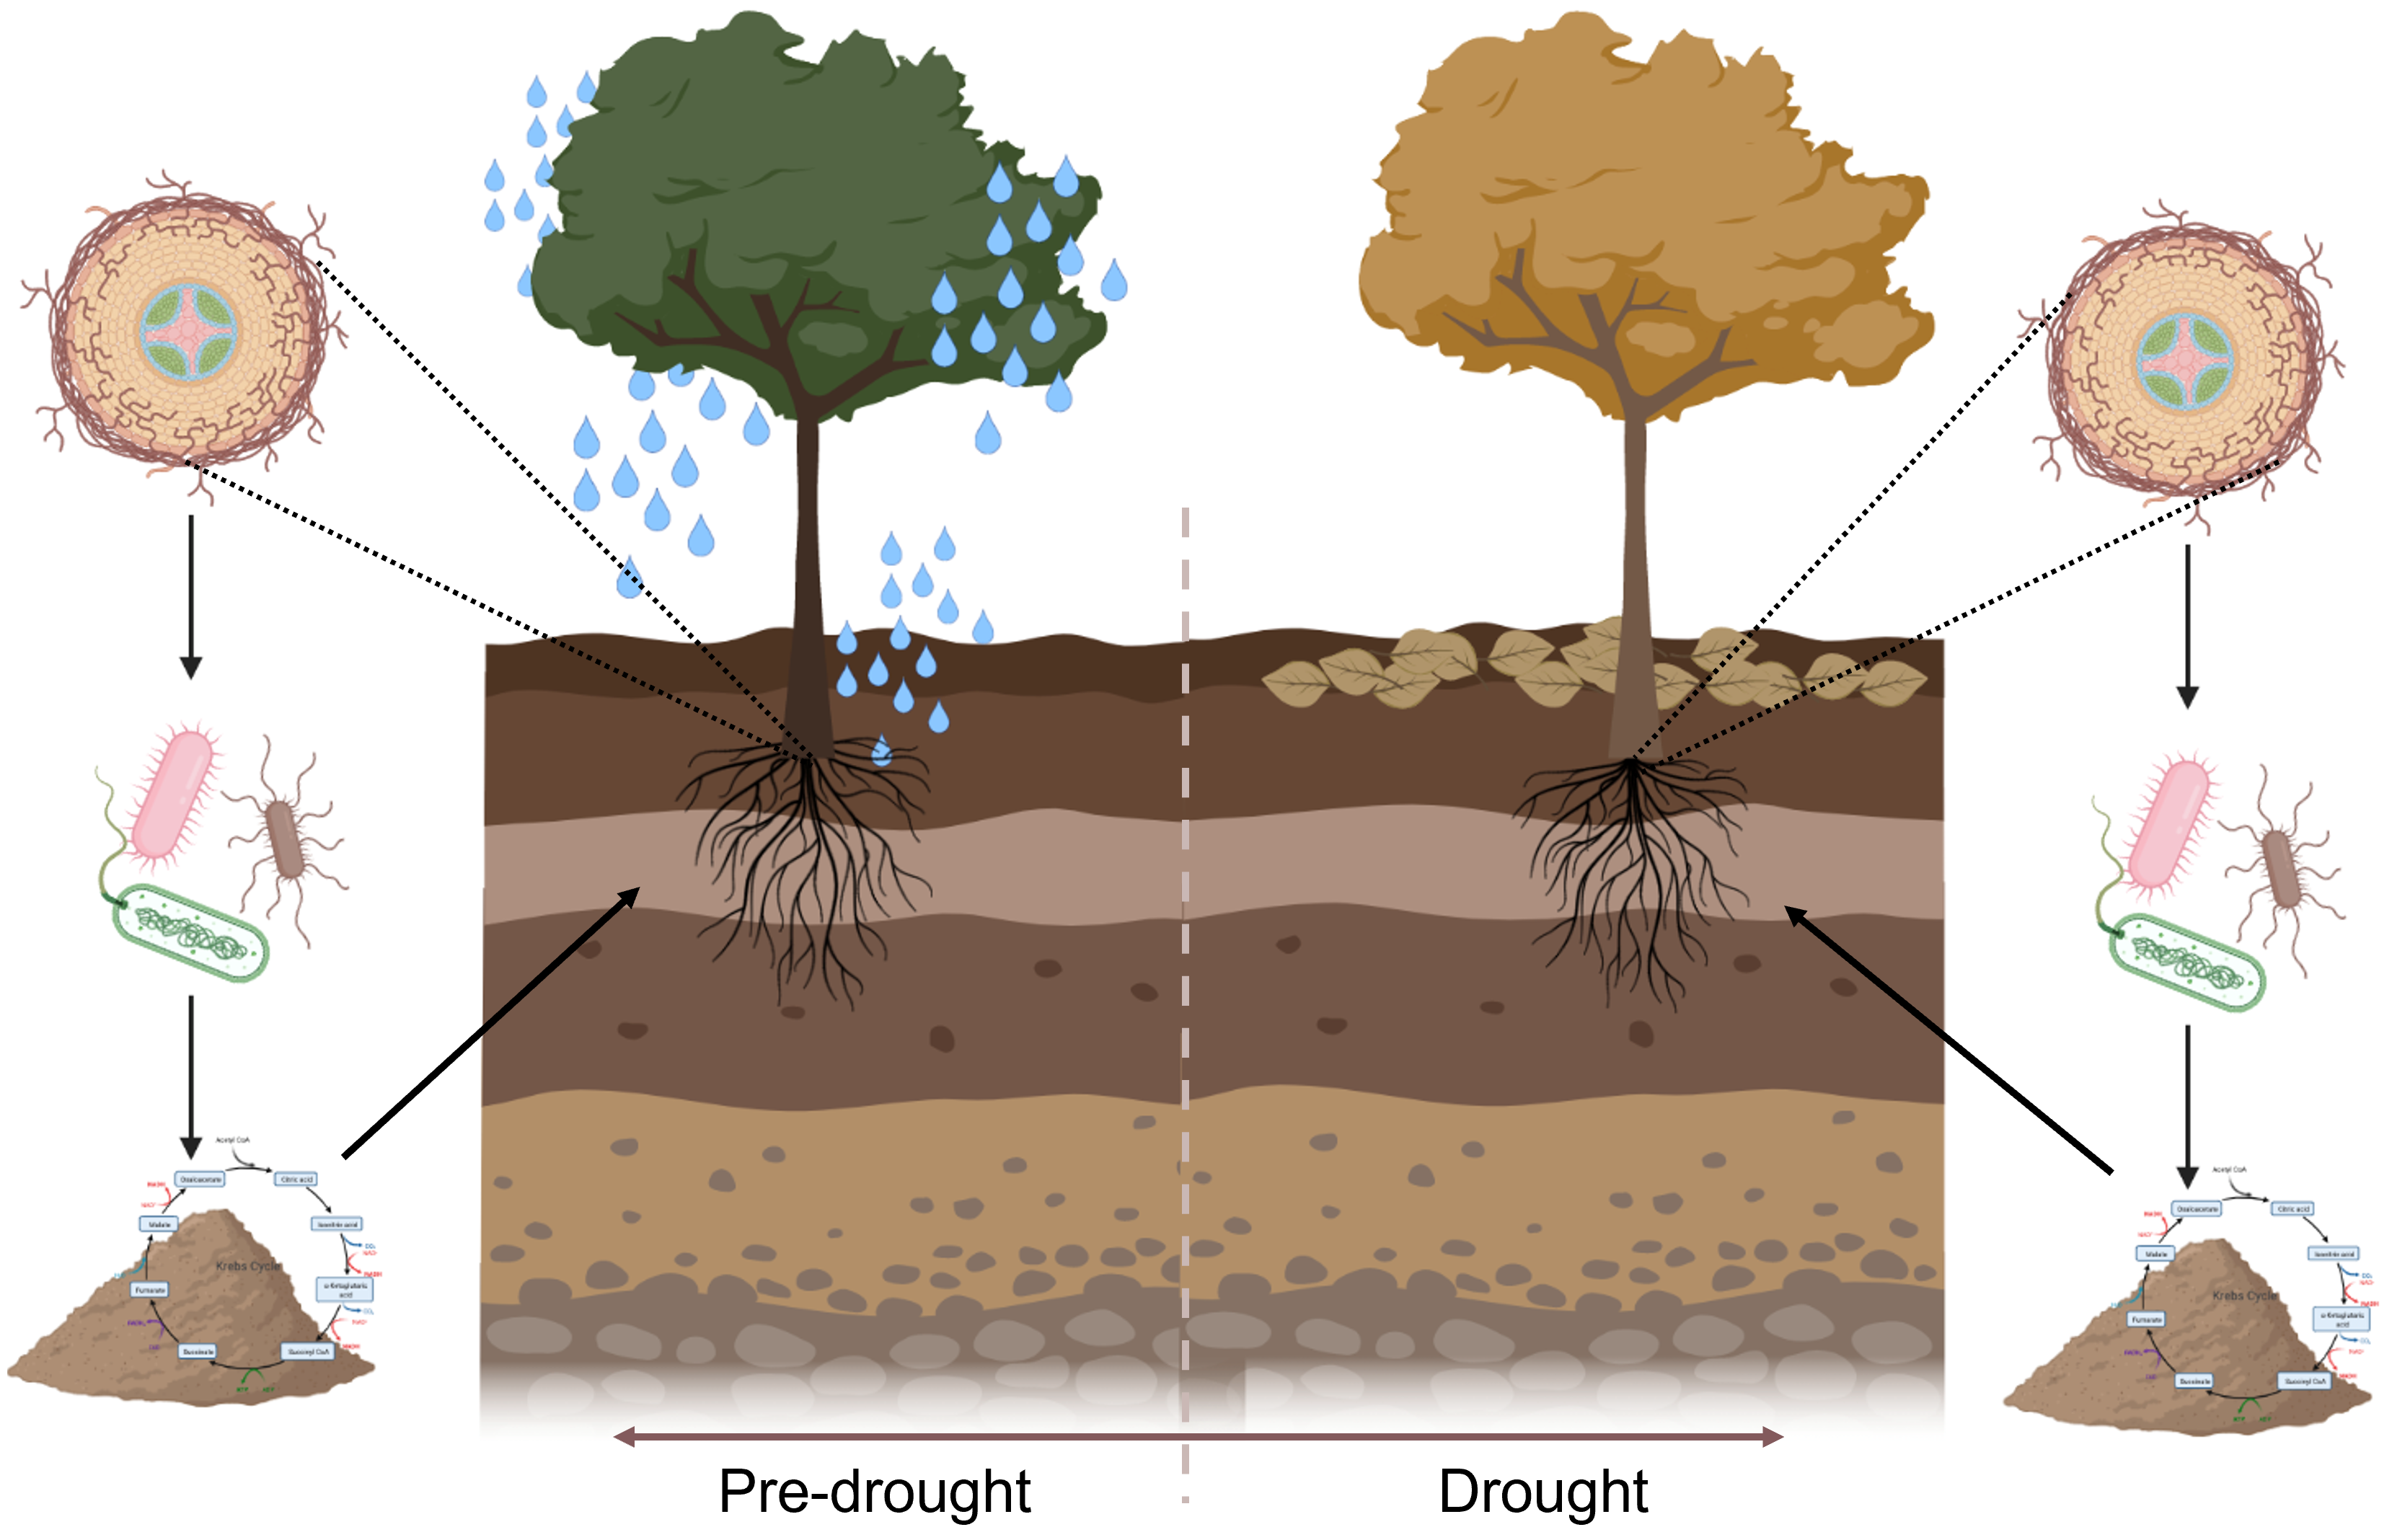 A rendering indicates how a plant interacts with the rhizosphere during drought conditions compared with normal rainfall. The left side of the image shows a tree receiving rain and the right side shows a tree during drought conditions. Both sides indicate pull-outs of microbes and bacteria and how they interact as part of a system.